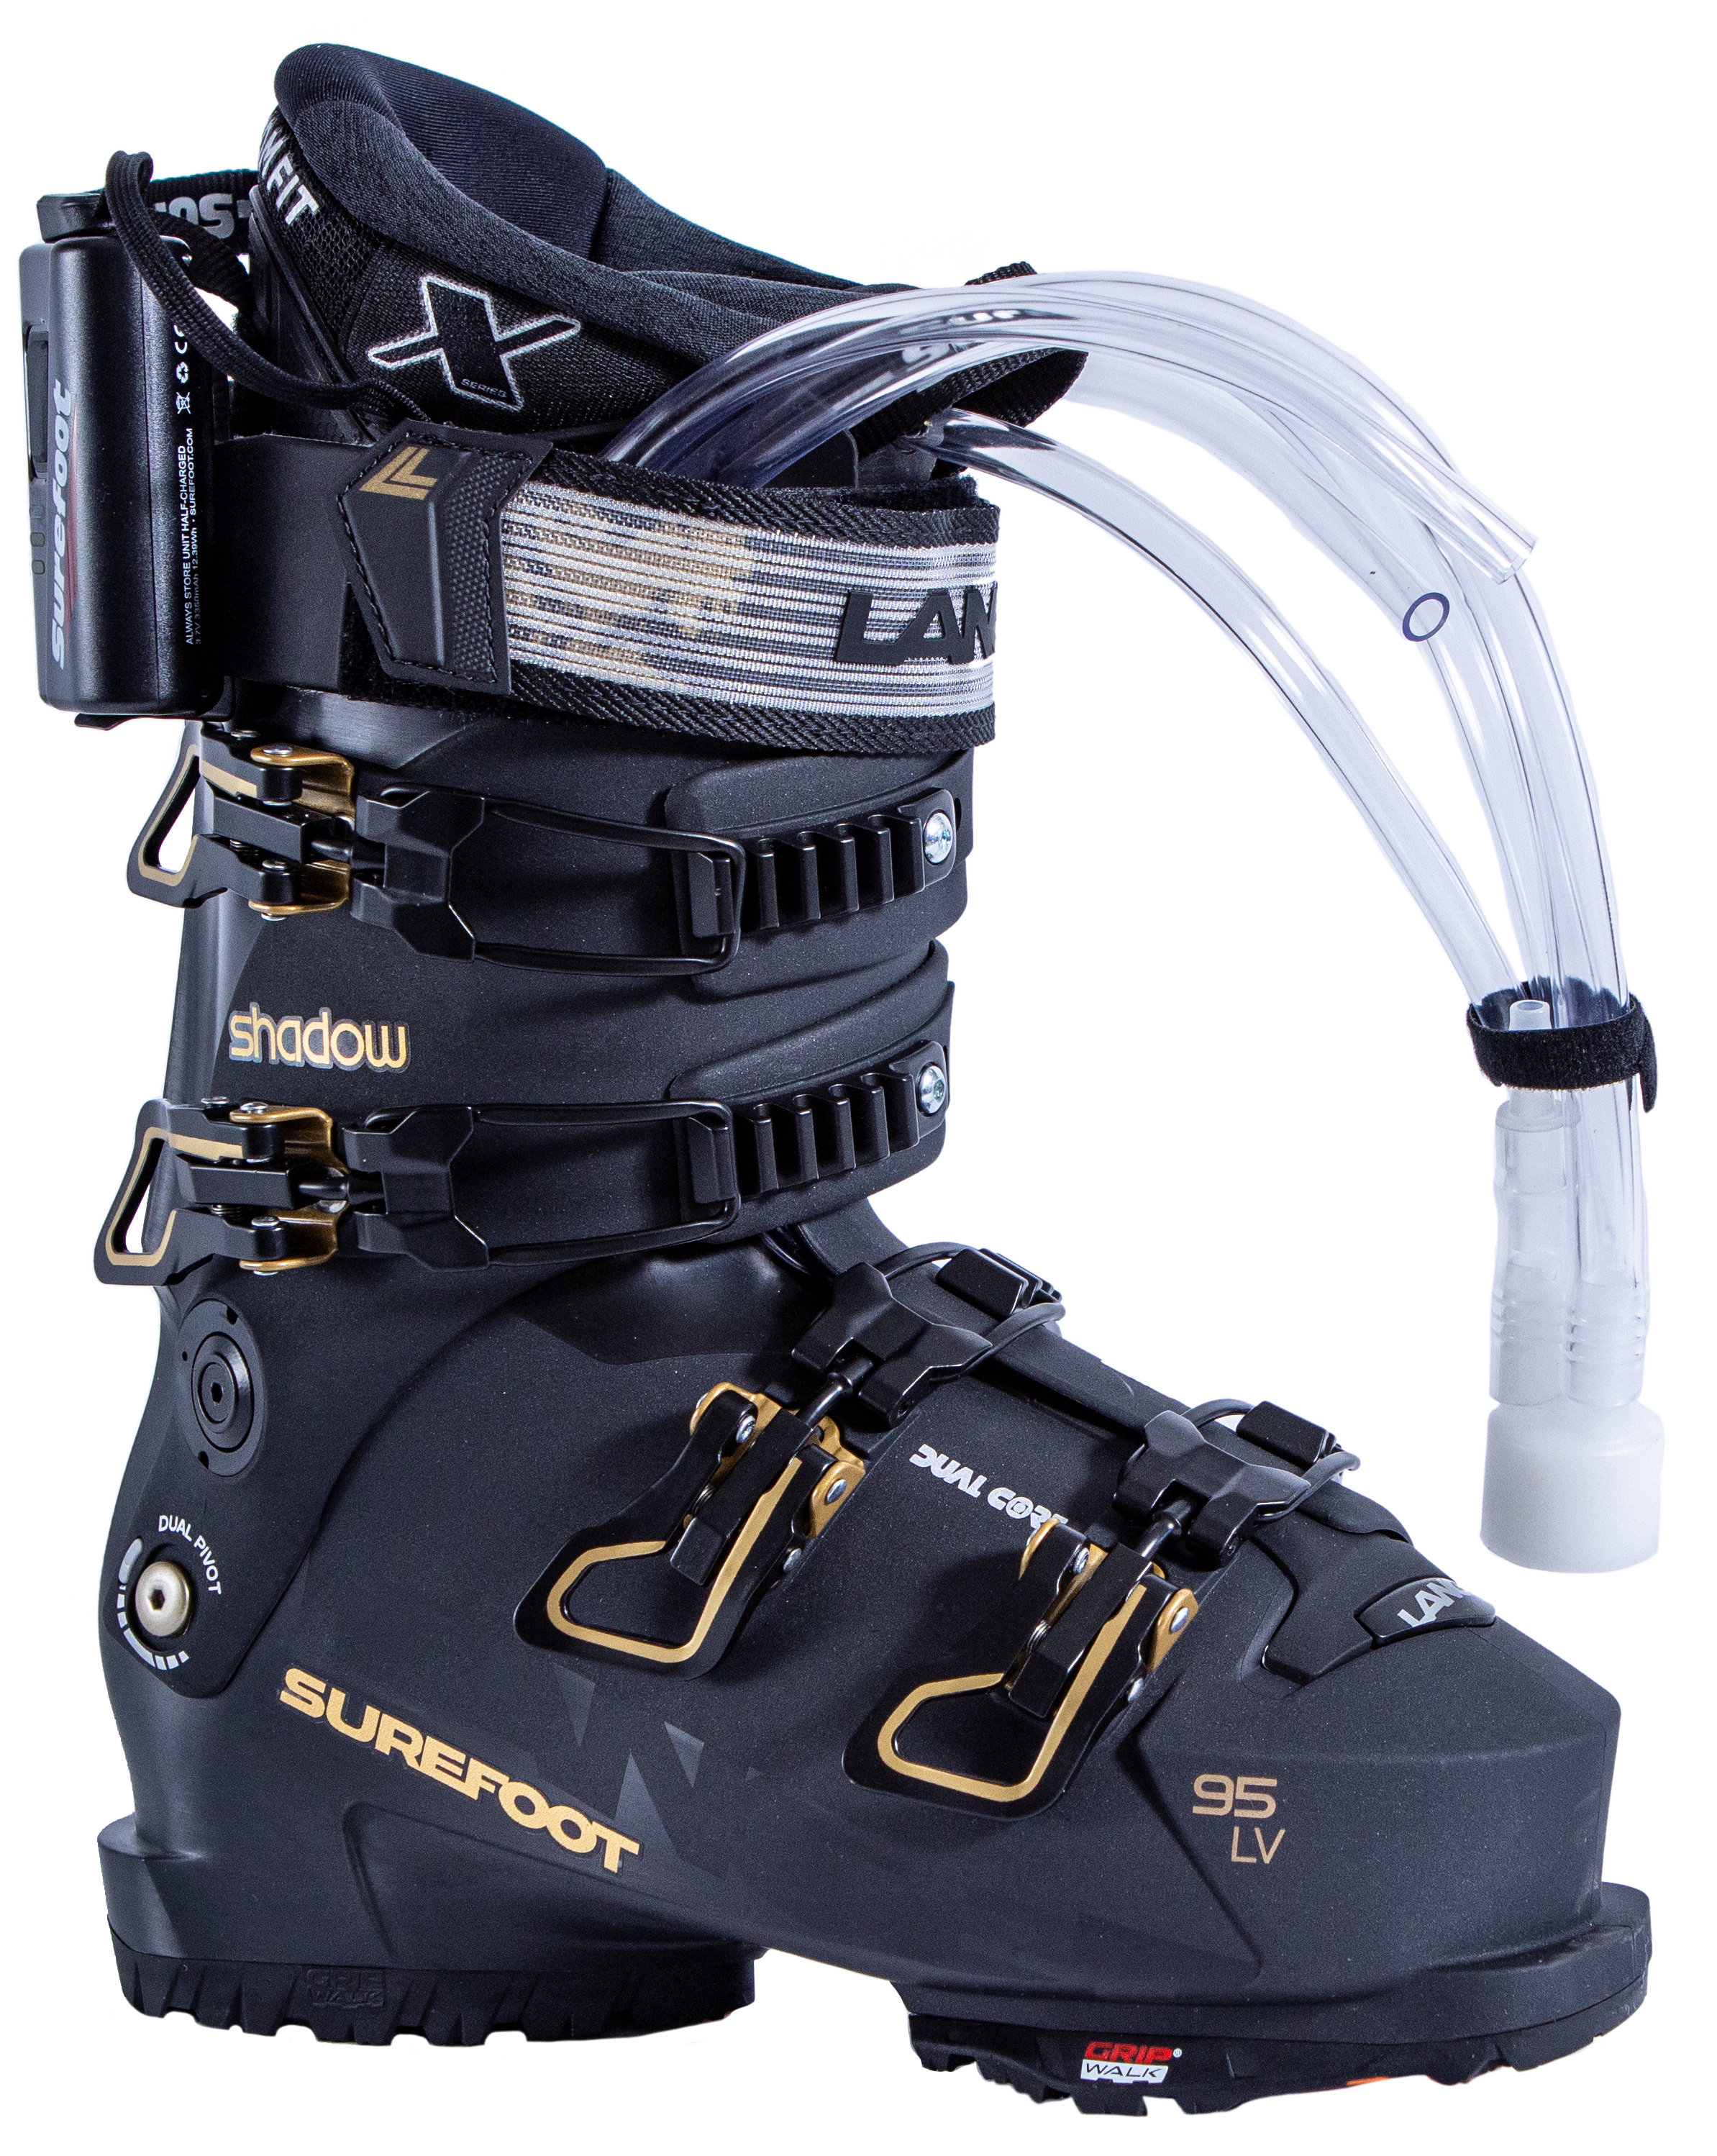 Surefoot Lange Shadow 95 LV matte black ski boot shell with gold accents on buckles and Lange logo in black on power strap, Surefoot logo in gold. Plastic tubes coming out for Surefoot memory foam injection into shell lining. Winterheat ski boot heater attached to outside edge.